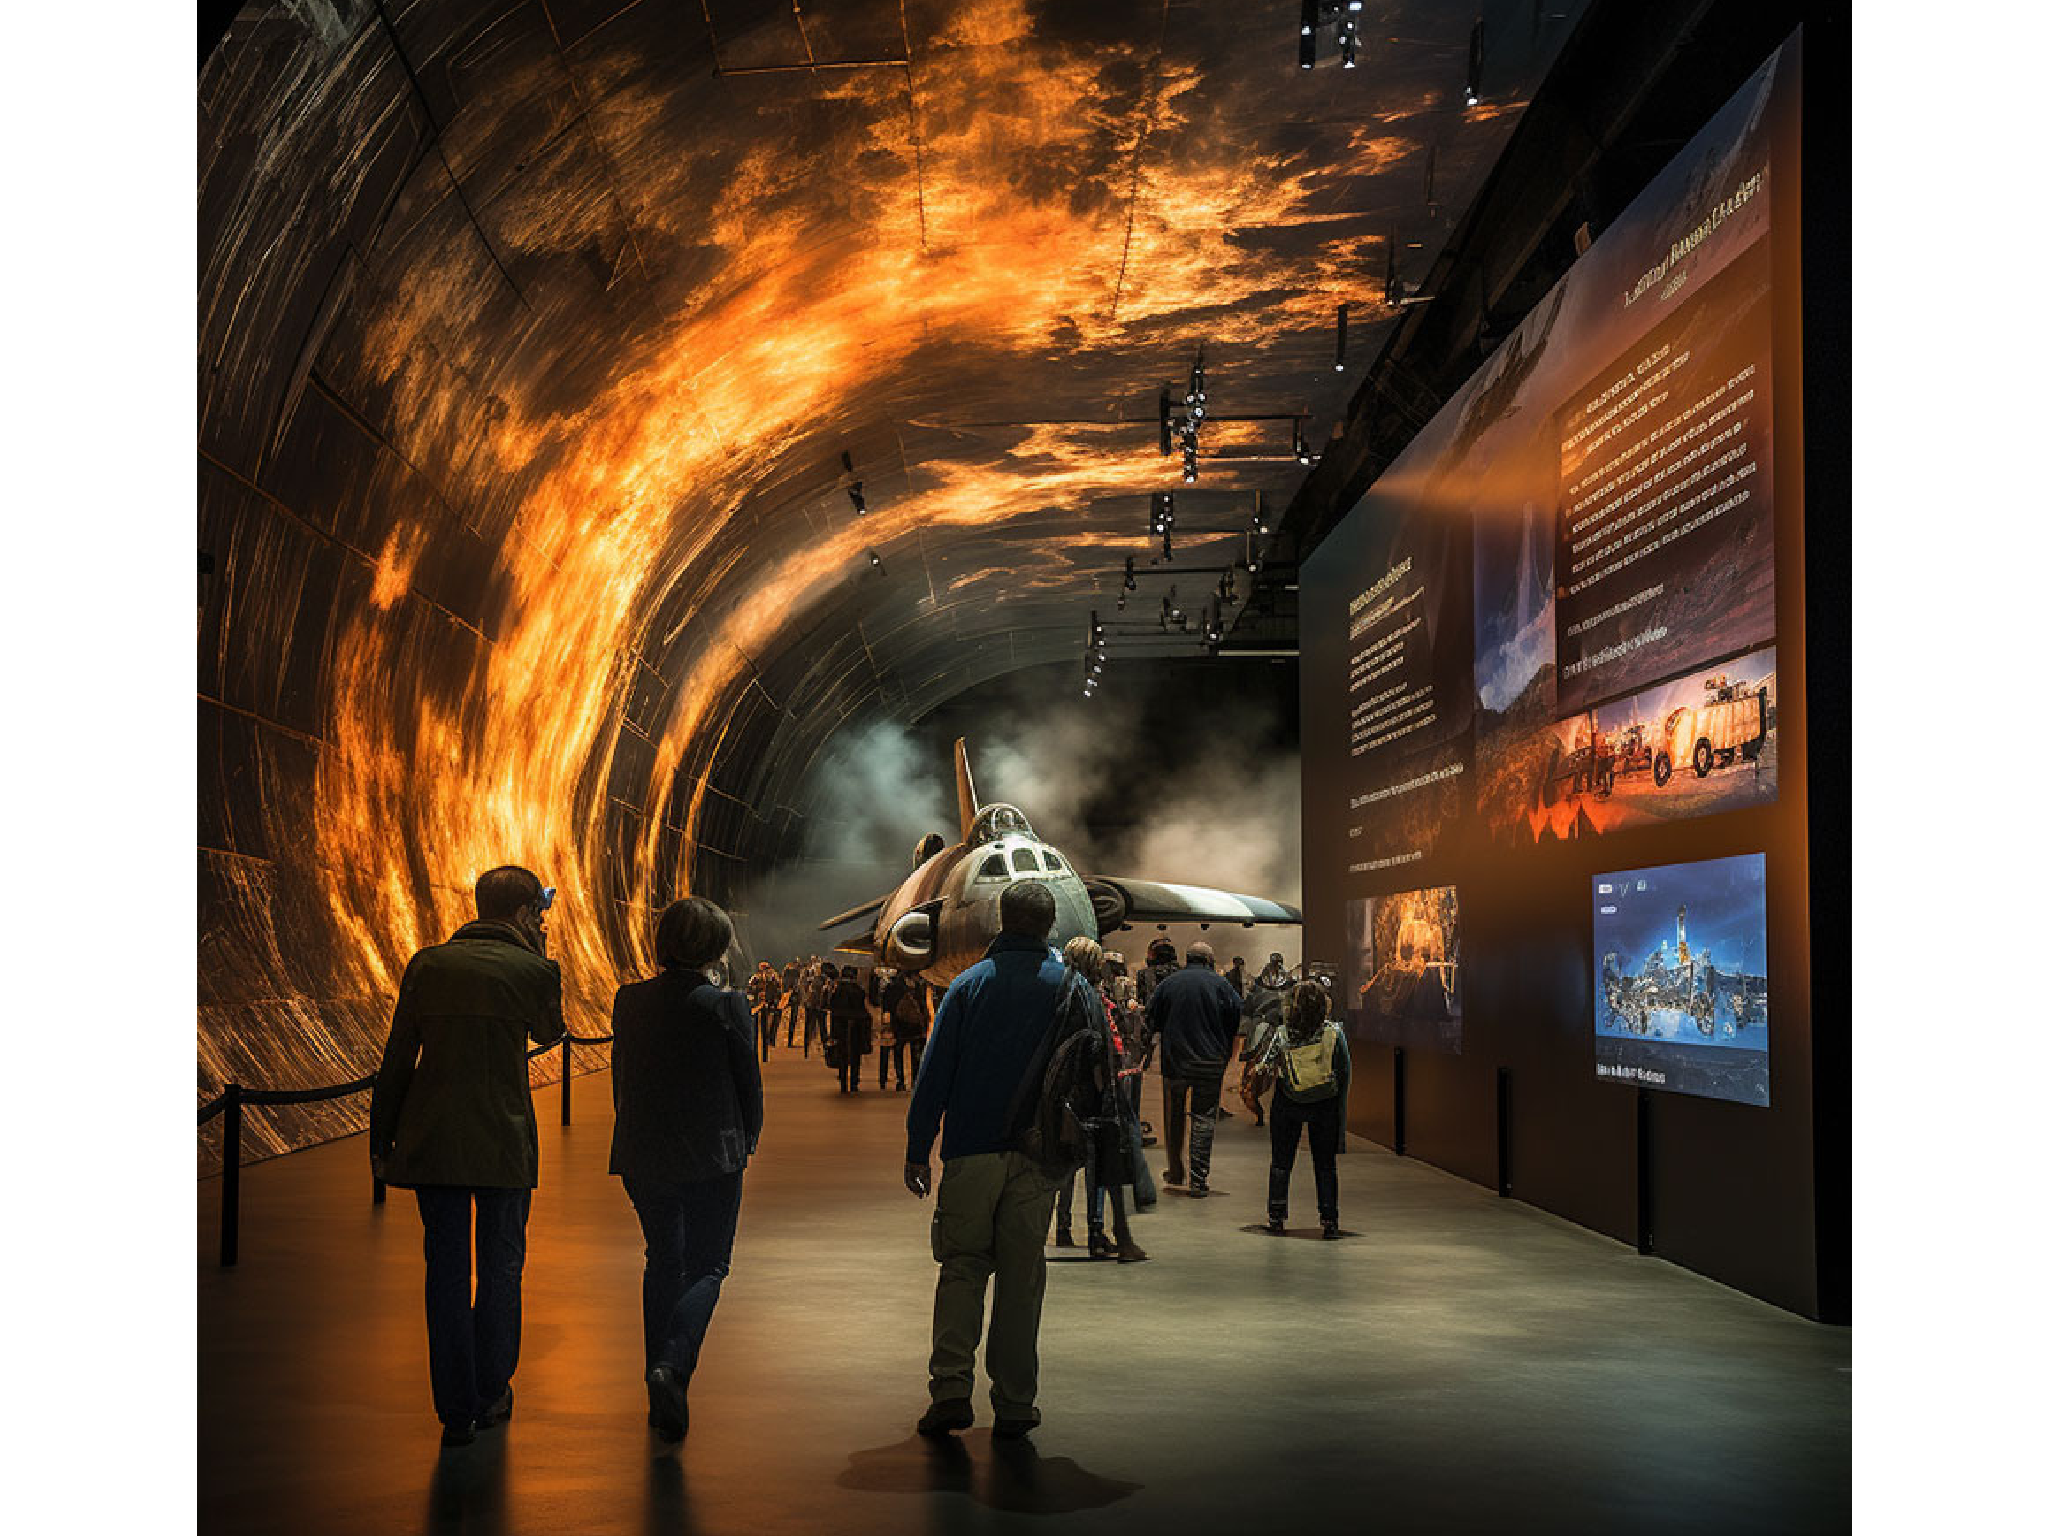 Visitors to the tunnel can expect big screens and “realistic scents”